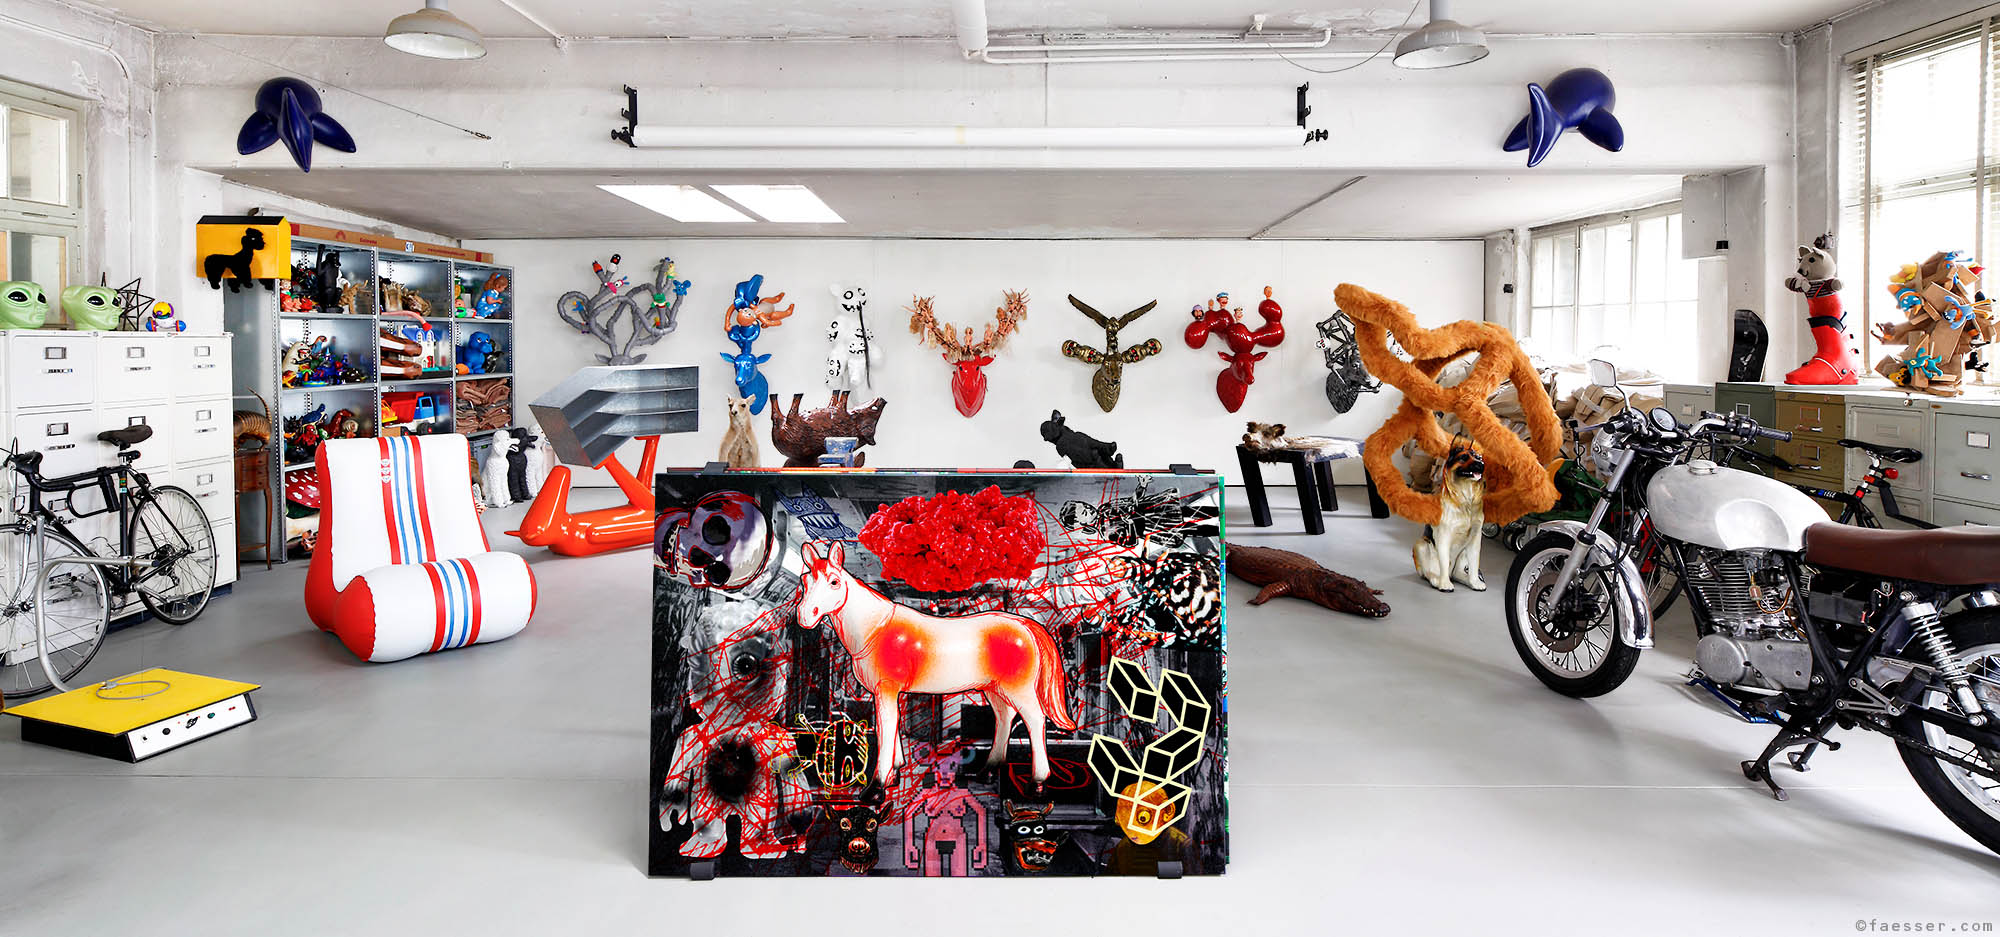 Studio gallery with trophies, sculptures and digital paintings at studio Zurich; works of art as figurative sculptures and digital paintings; artist Roland Faesser, sculptor and painter 2011